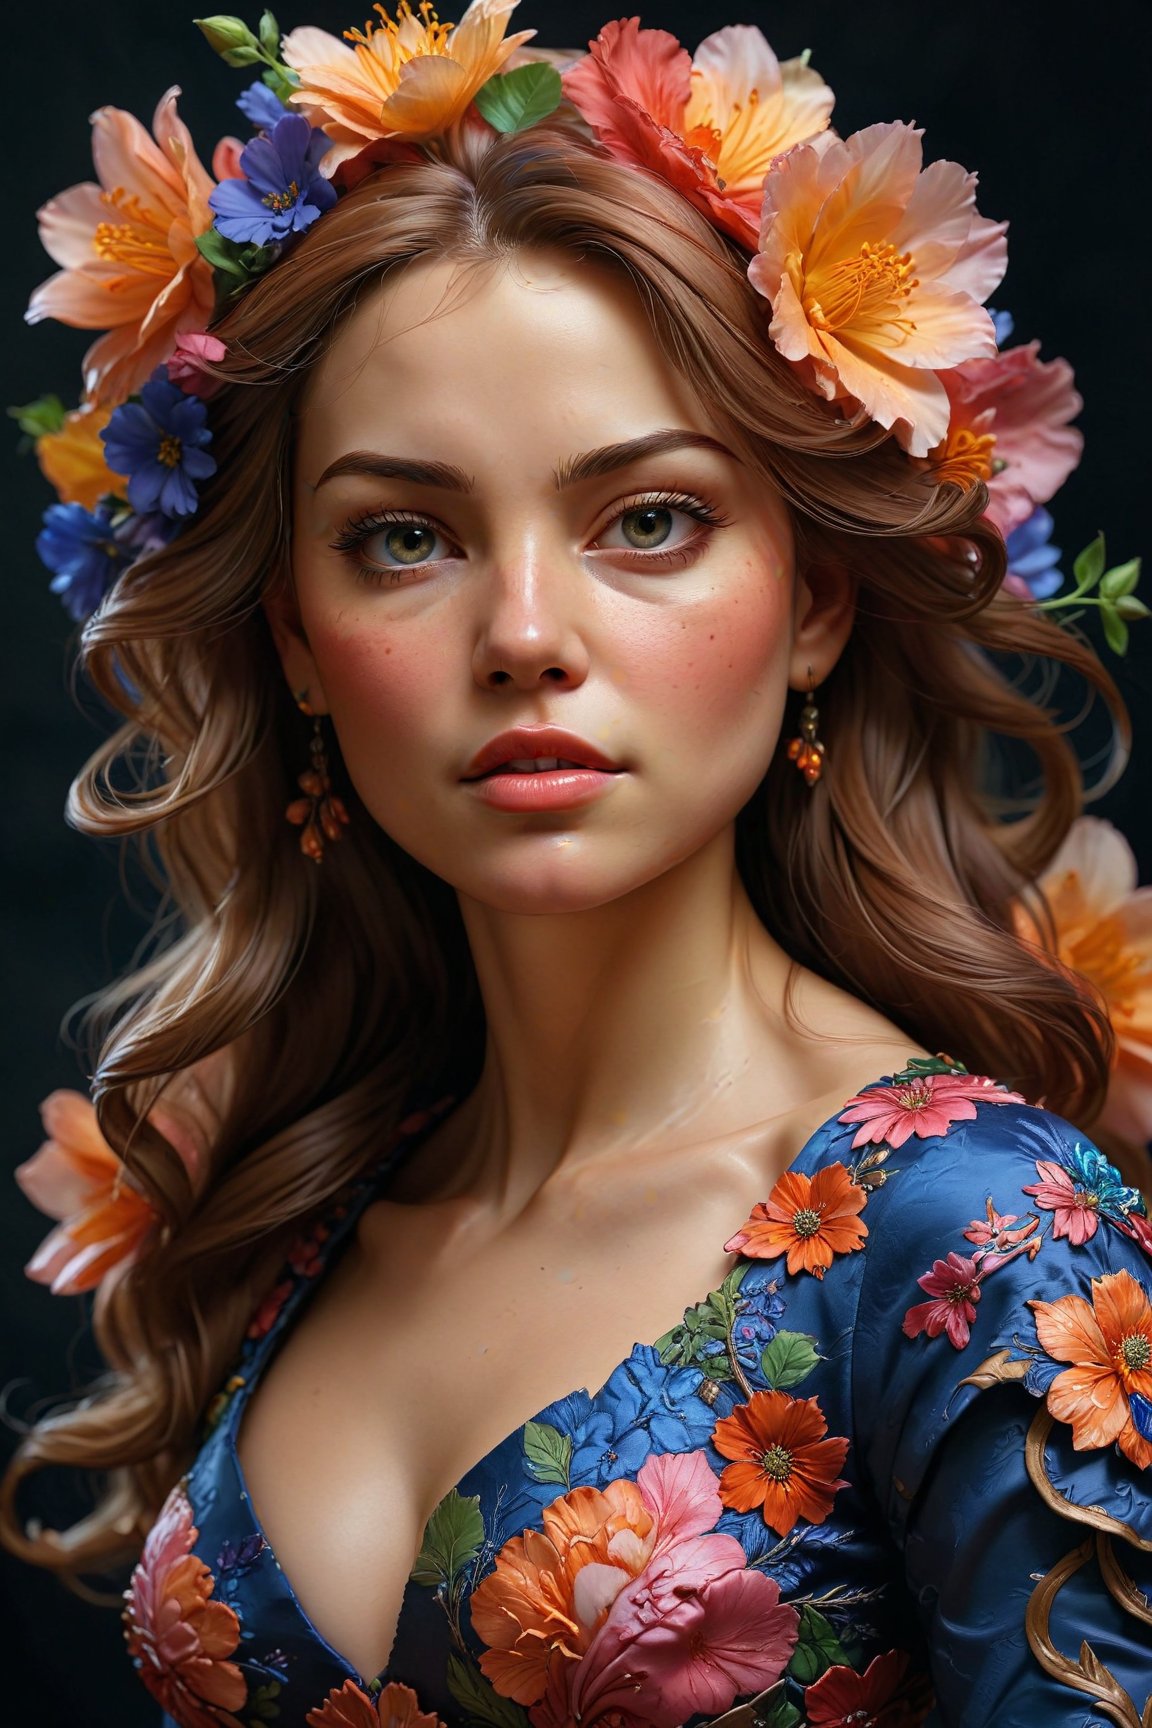 (best quality, realistic, high-resolution), colorful portrait of a woman with flawless anatomy. She is wearing a stunning flower dress that compliments her vibrant personality. Her skin is extremely detailed and realistic, with a natural and lifelike texture. The background is dark, which creates a striking contrast to the colorful flowers adorning her armor. The flowers on her armor represent her strength and beauty. The lighting accentuates the contours of her face, adding depth and dimension to the portrait. The overall composition is masterfully done, showcasing the intricate details and achieving a high level of realism